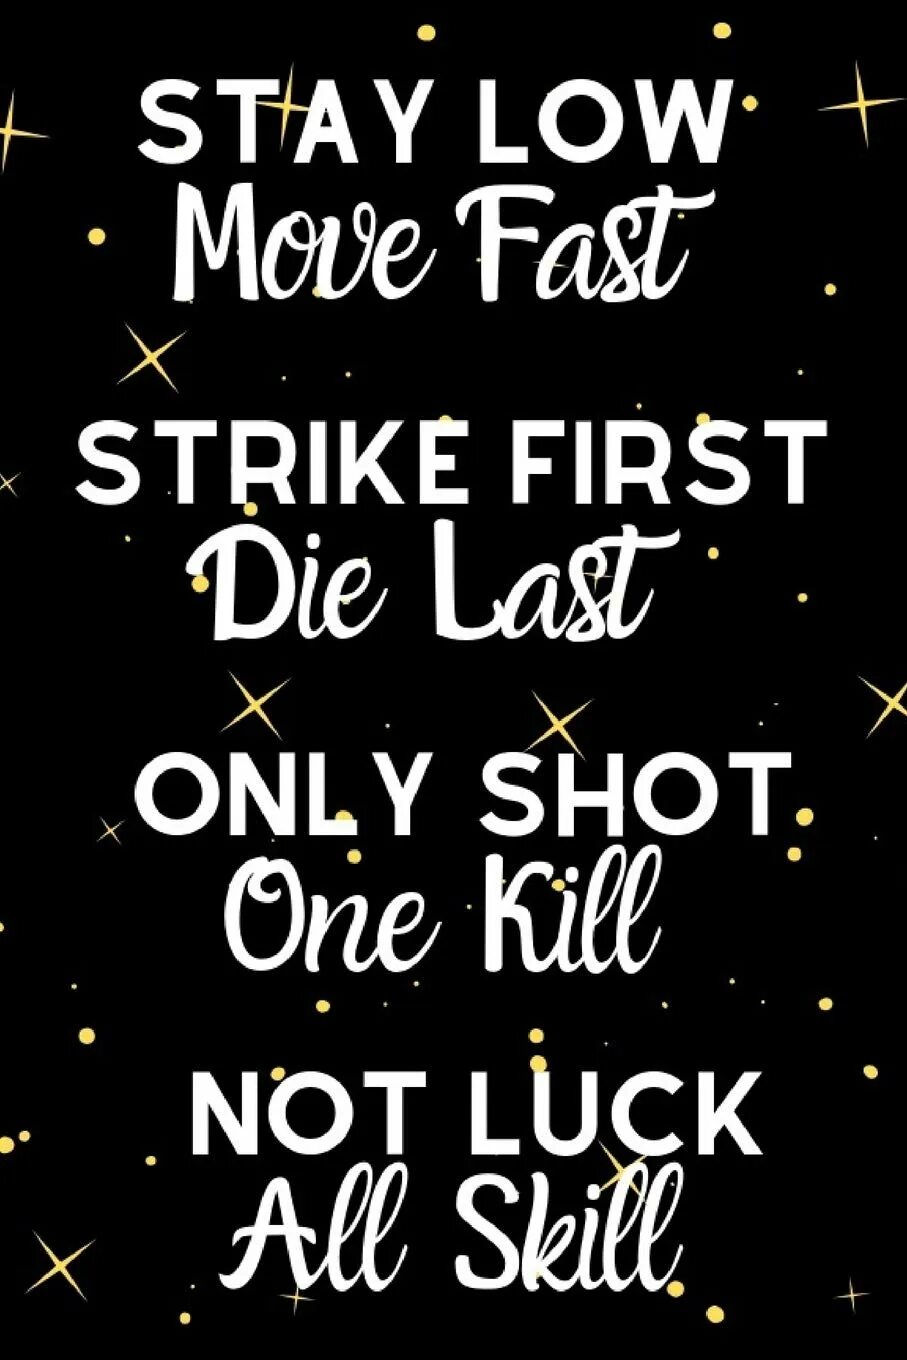 Stay Low. "Stay Low, go fast". Stay Low go fast Kill first die last one shot one Kill no luck all skill. One shot Kill. Stay fast